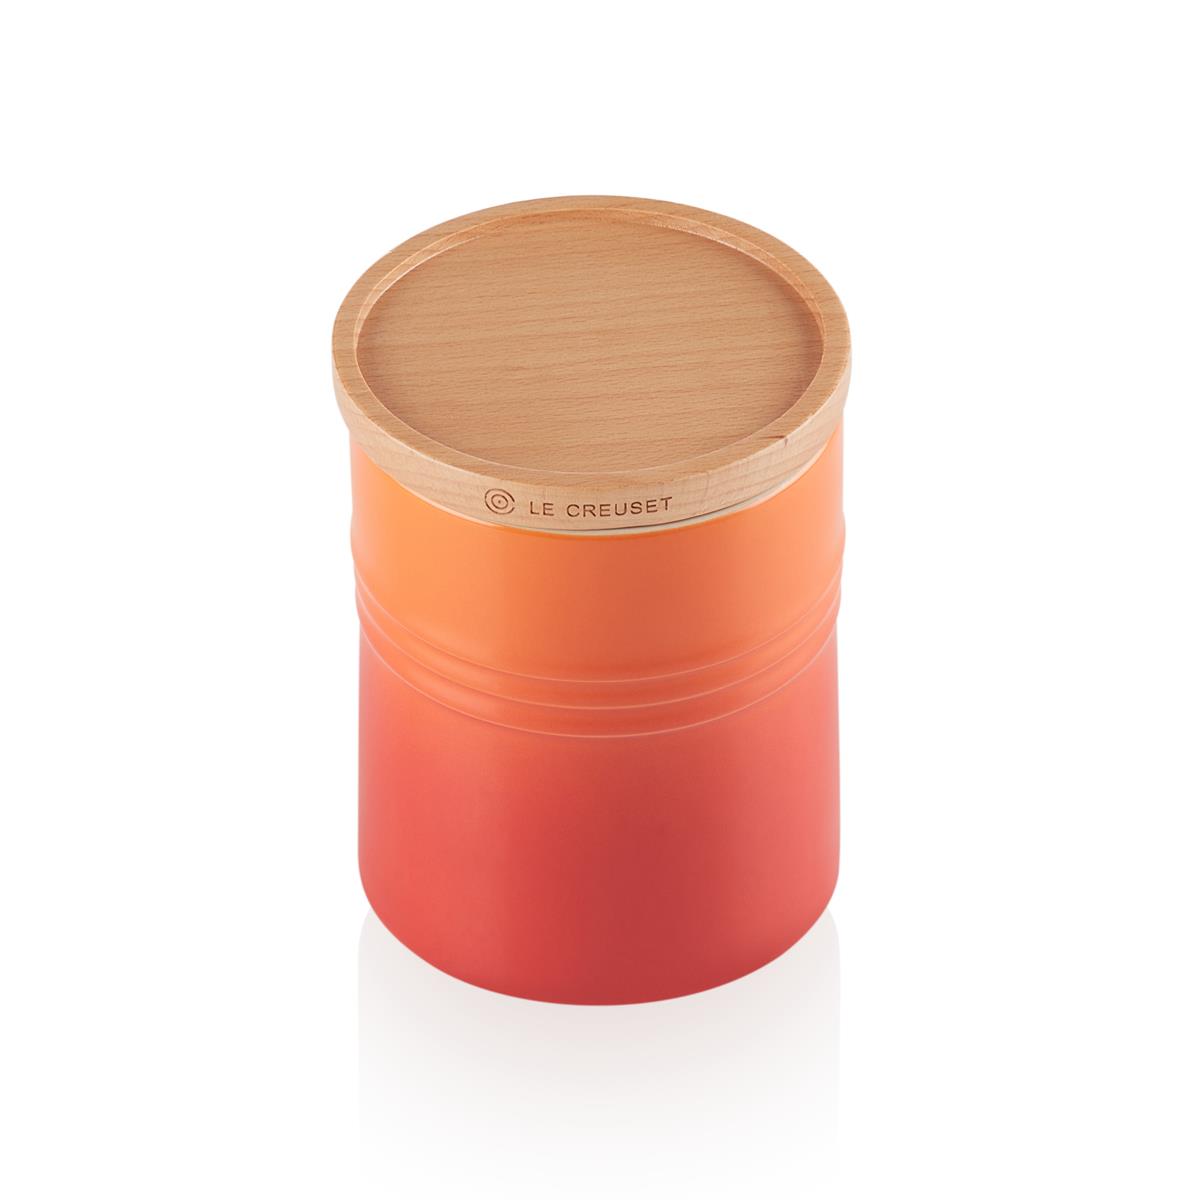 What can the Le Creuset Storage Jar hold?